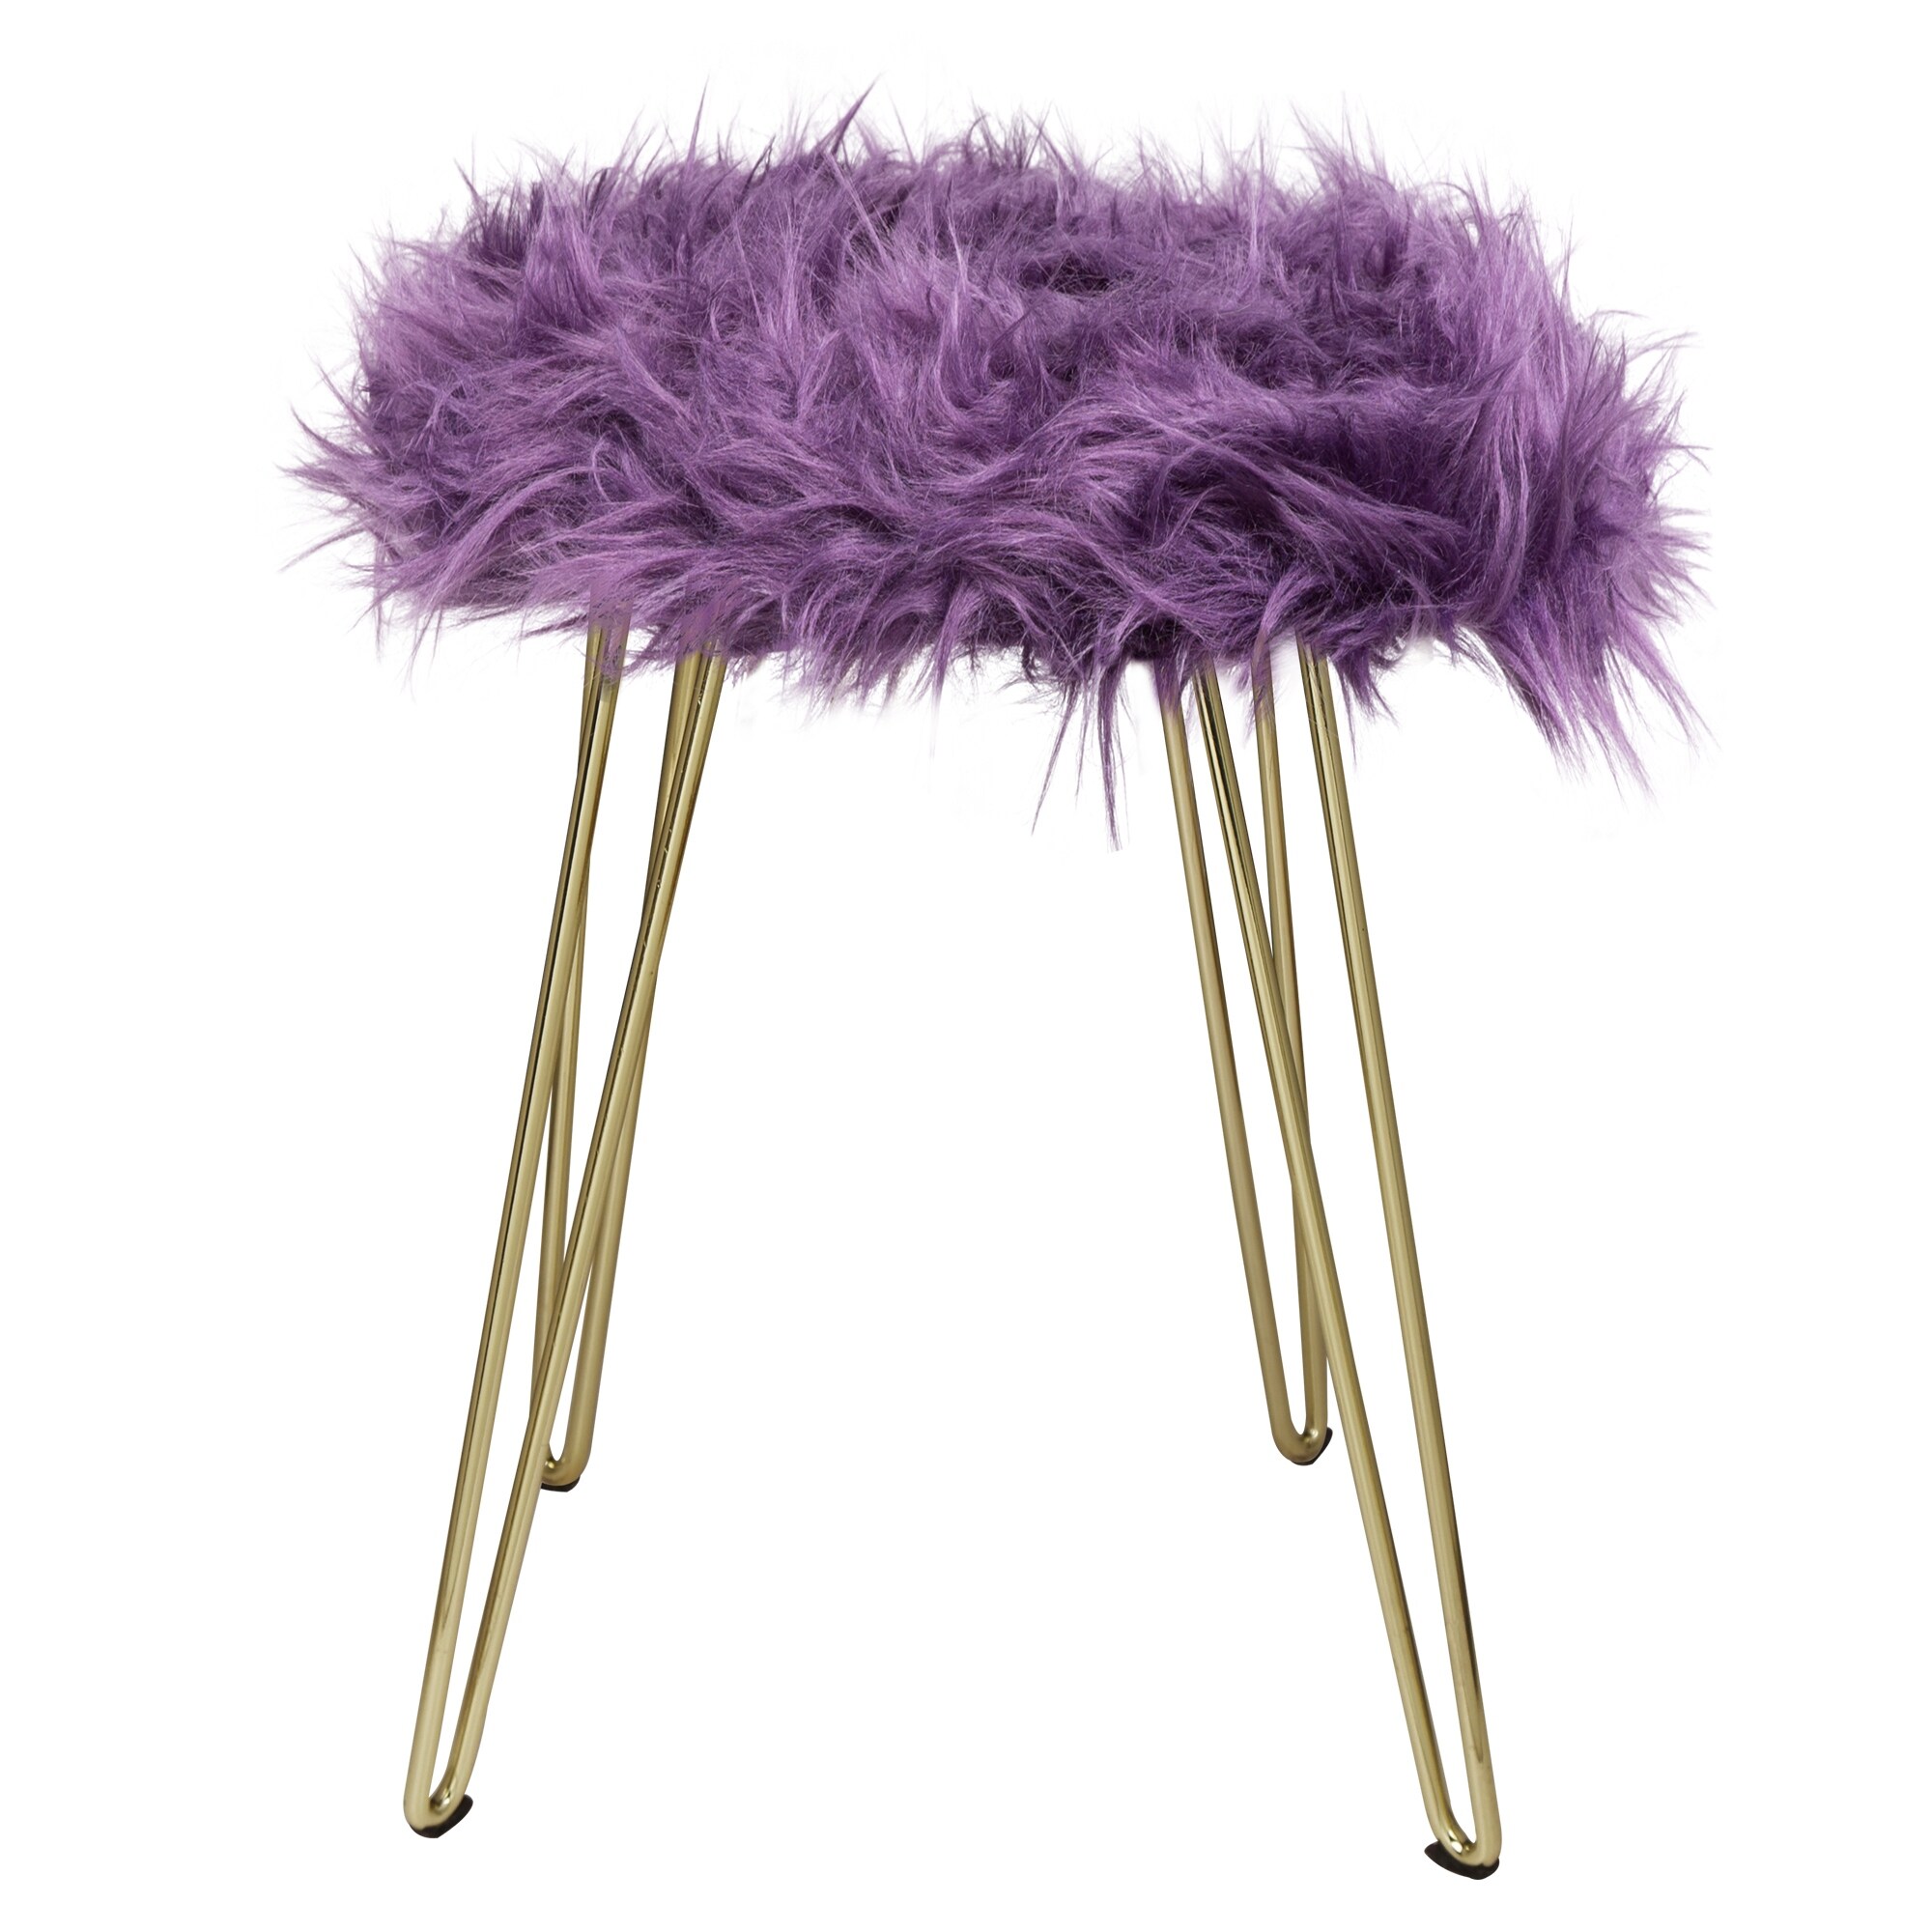 https://ak1.ostkcdn.com/images/products/is/images/direct/160a6586cdf987c0746bb0819b8ffcb1ae68d48c/Faux-Foot-Stool-Vanity-Chair-with-Golden-Metal-Legs%2C-Small-Fuzzy-Fluffy-Round-Ottoman-Storage---1-Pcs.jpg